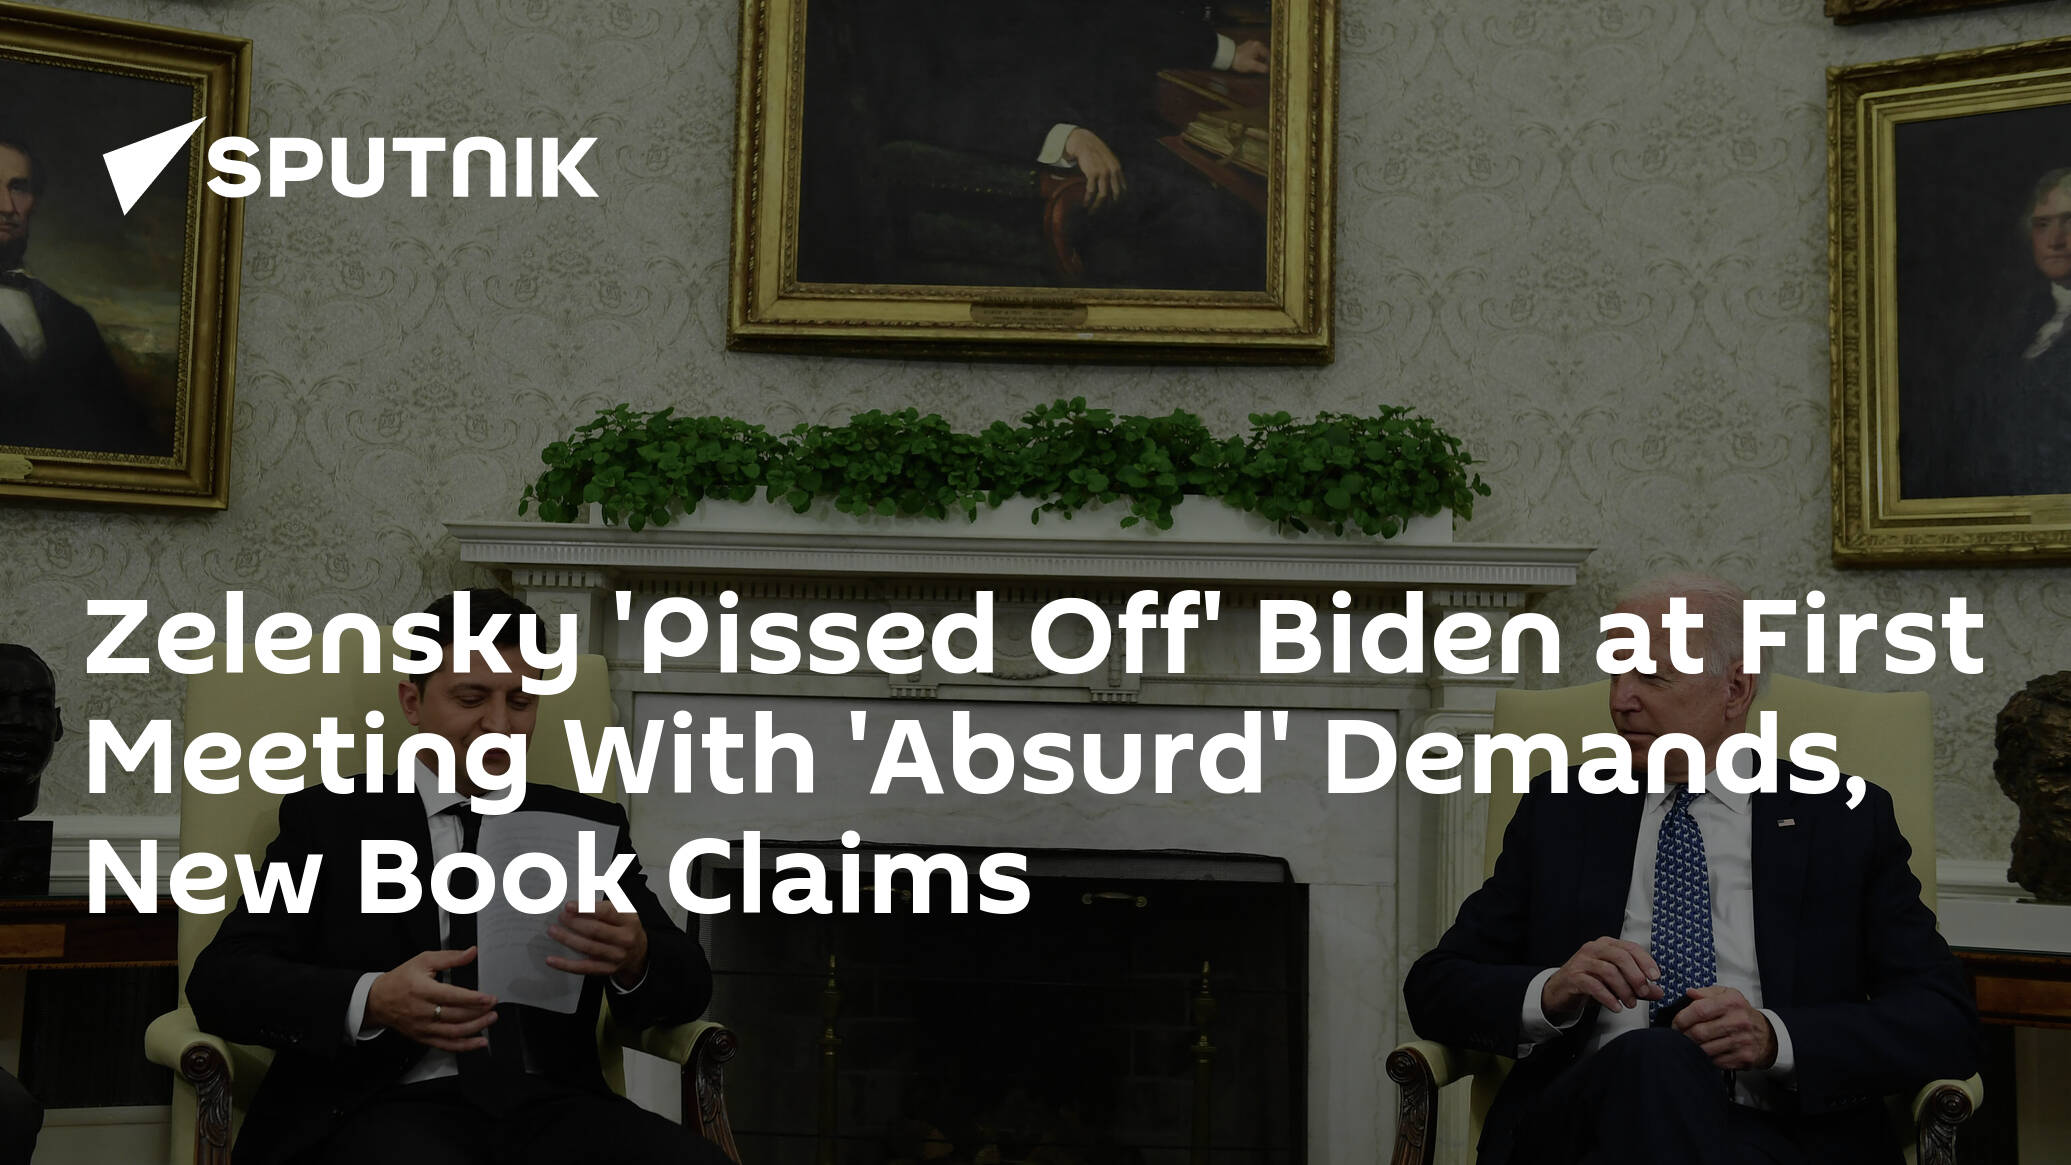 Zelensky 'Pissed Off' Biden at First Meeting With 'Absurd' Demands, Book  Claims